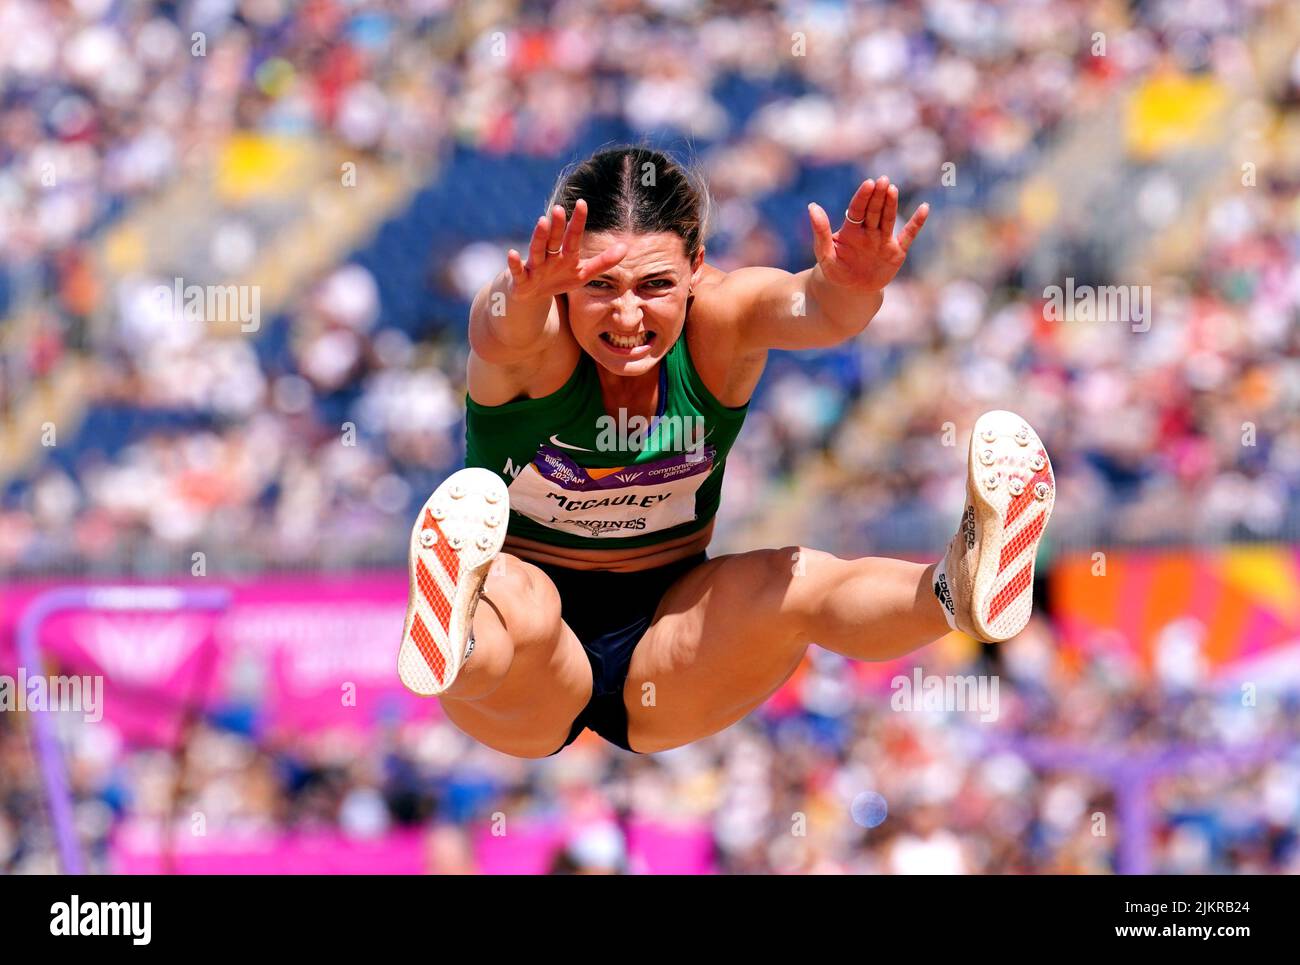 Northern Ireland's Anna McCauley in action during the Long Jump element of the Women's Heptathlon at Alexander Stadium on day six of the 2022 Commonwealth Games in Birmingham. Picture date: Wednesday August 3, 2022. Stock Photo